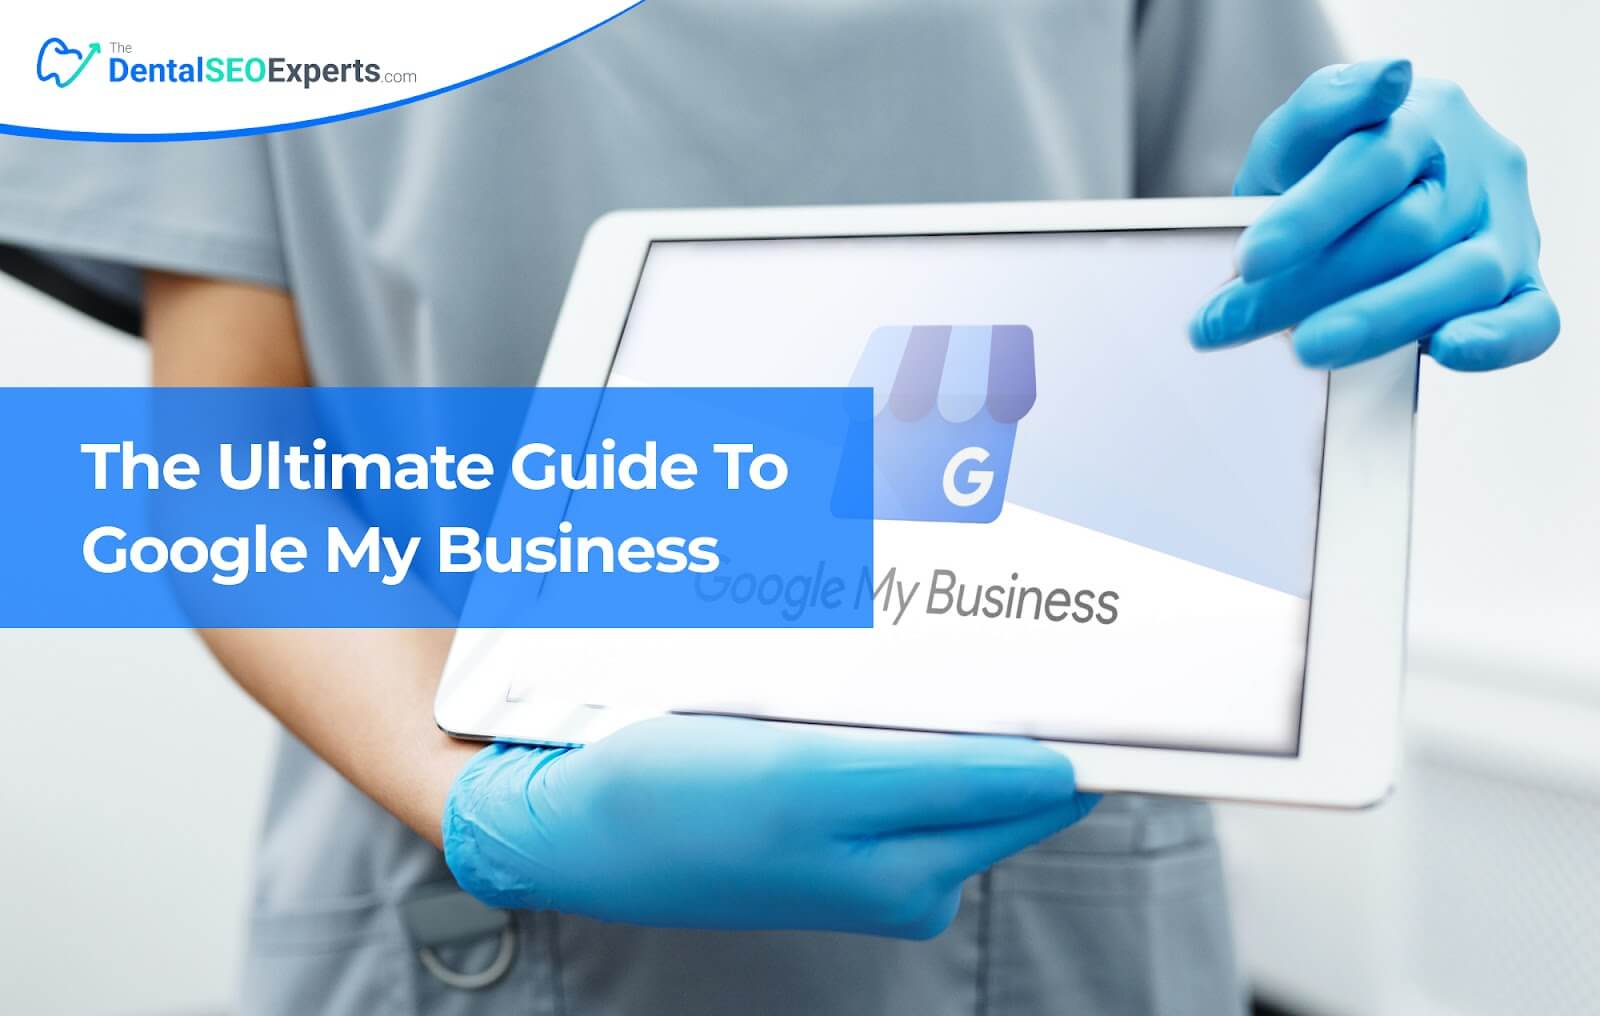 The Ultimate Guide To Google My Business